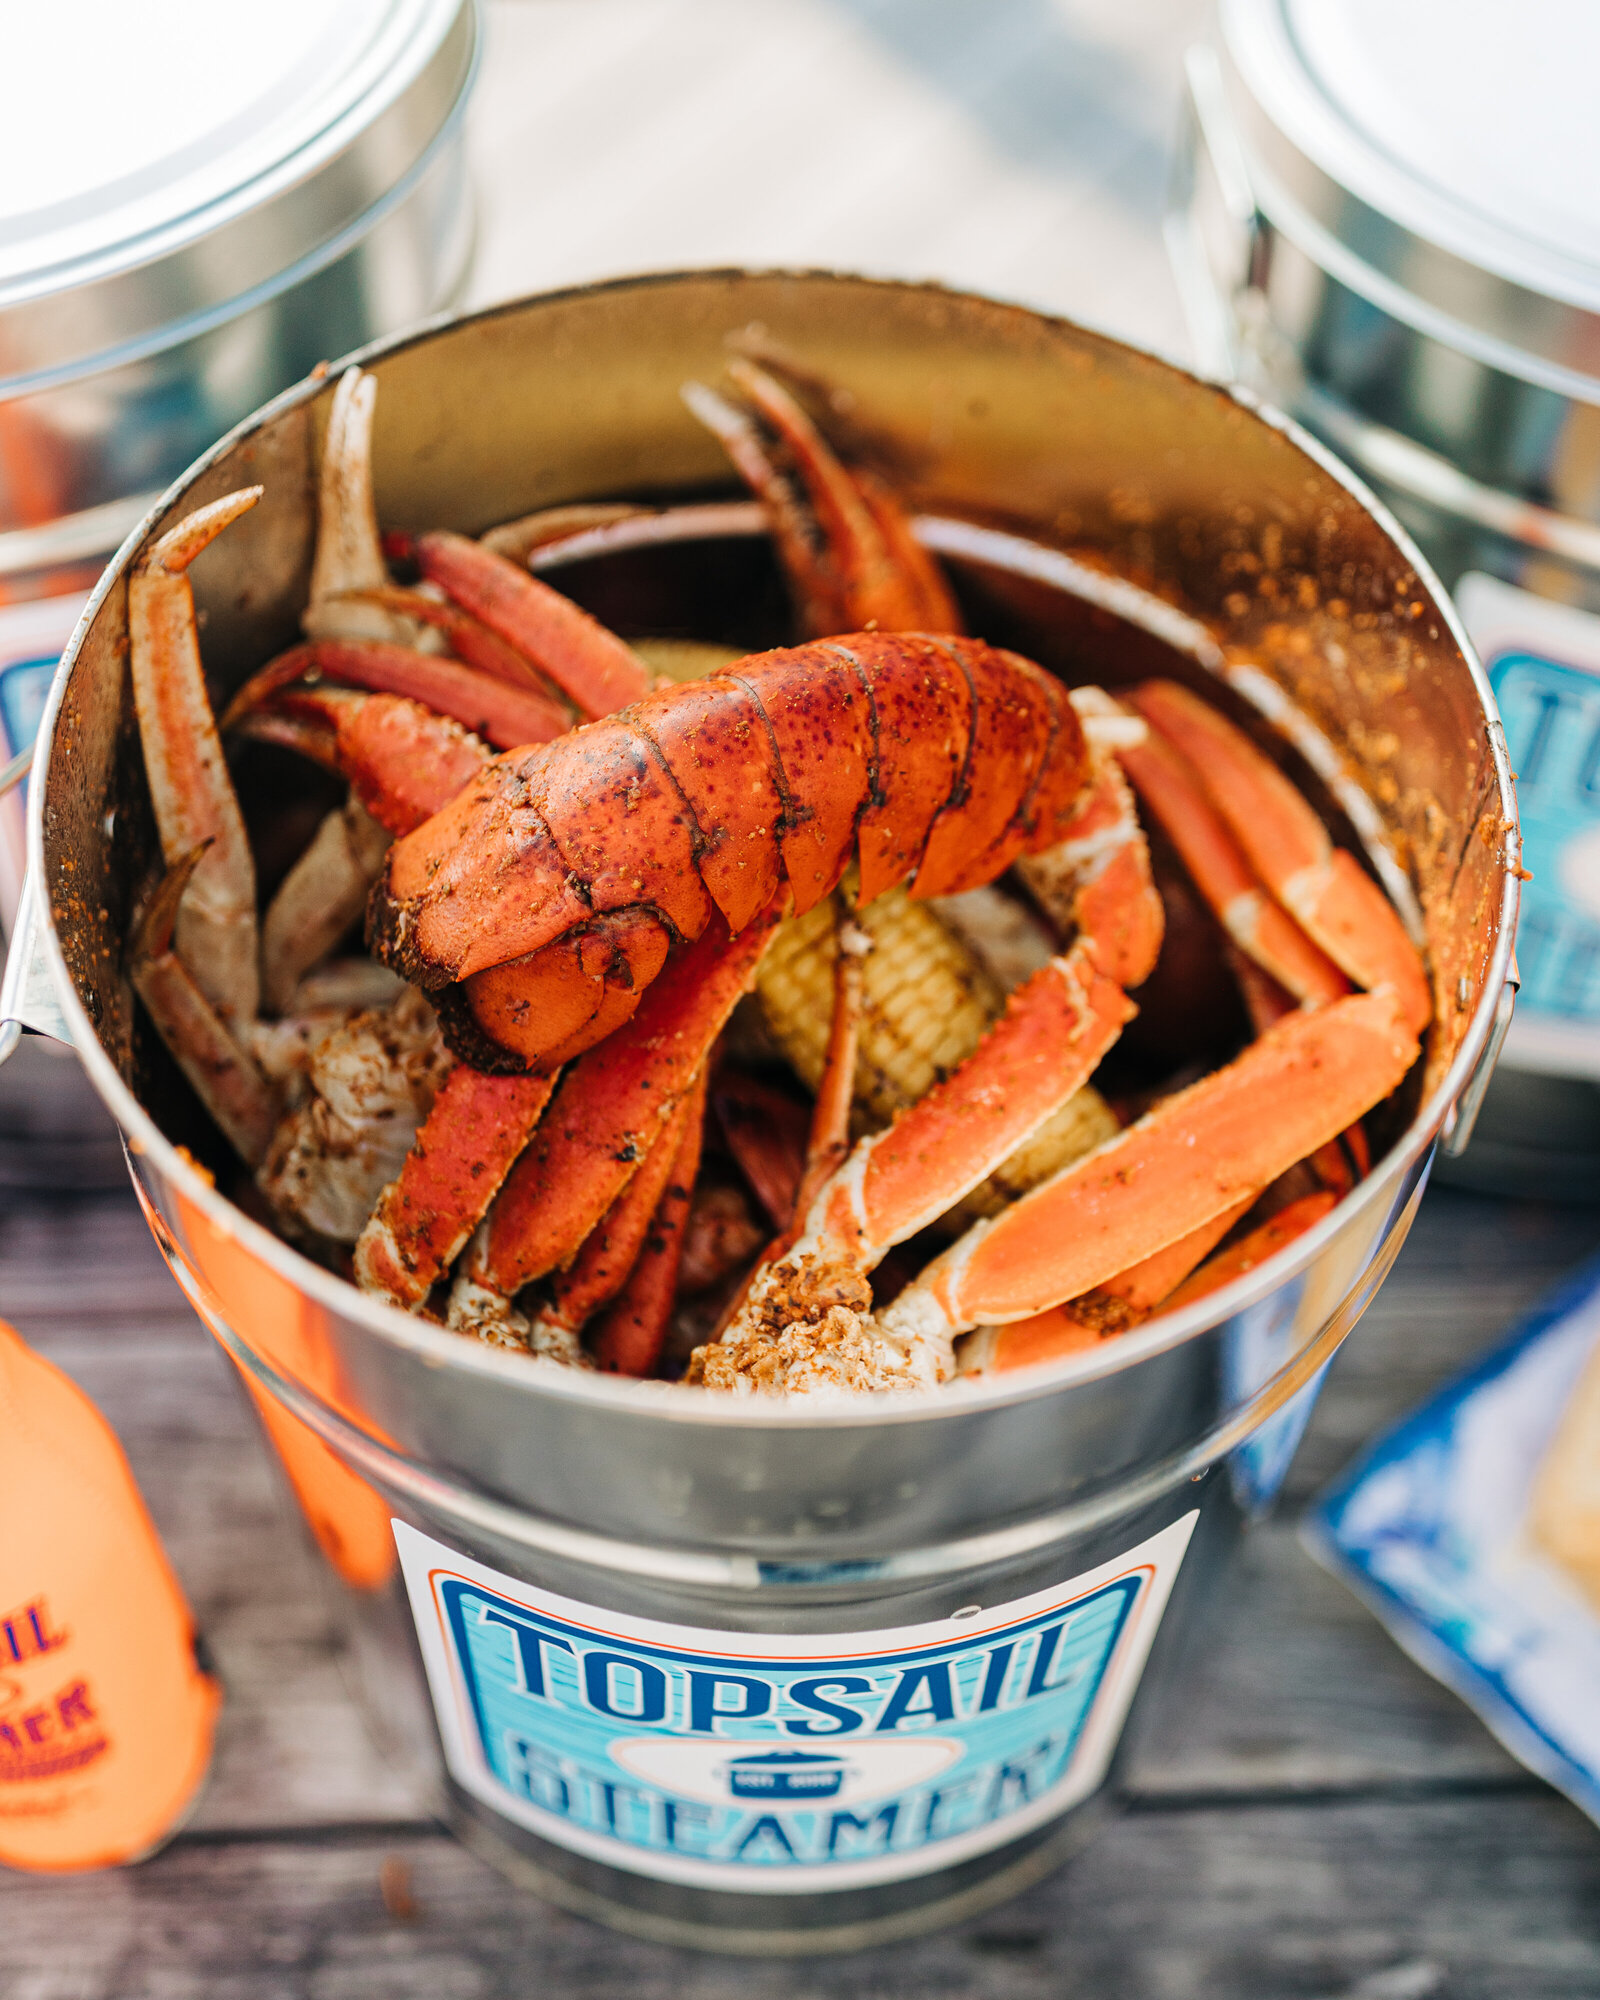 Topsail Steamer - Take Home, Steam & Eat Seafood Steam Pots